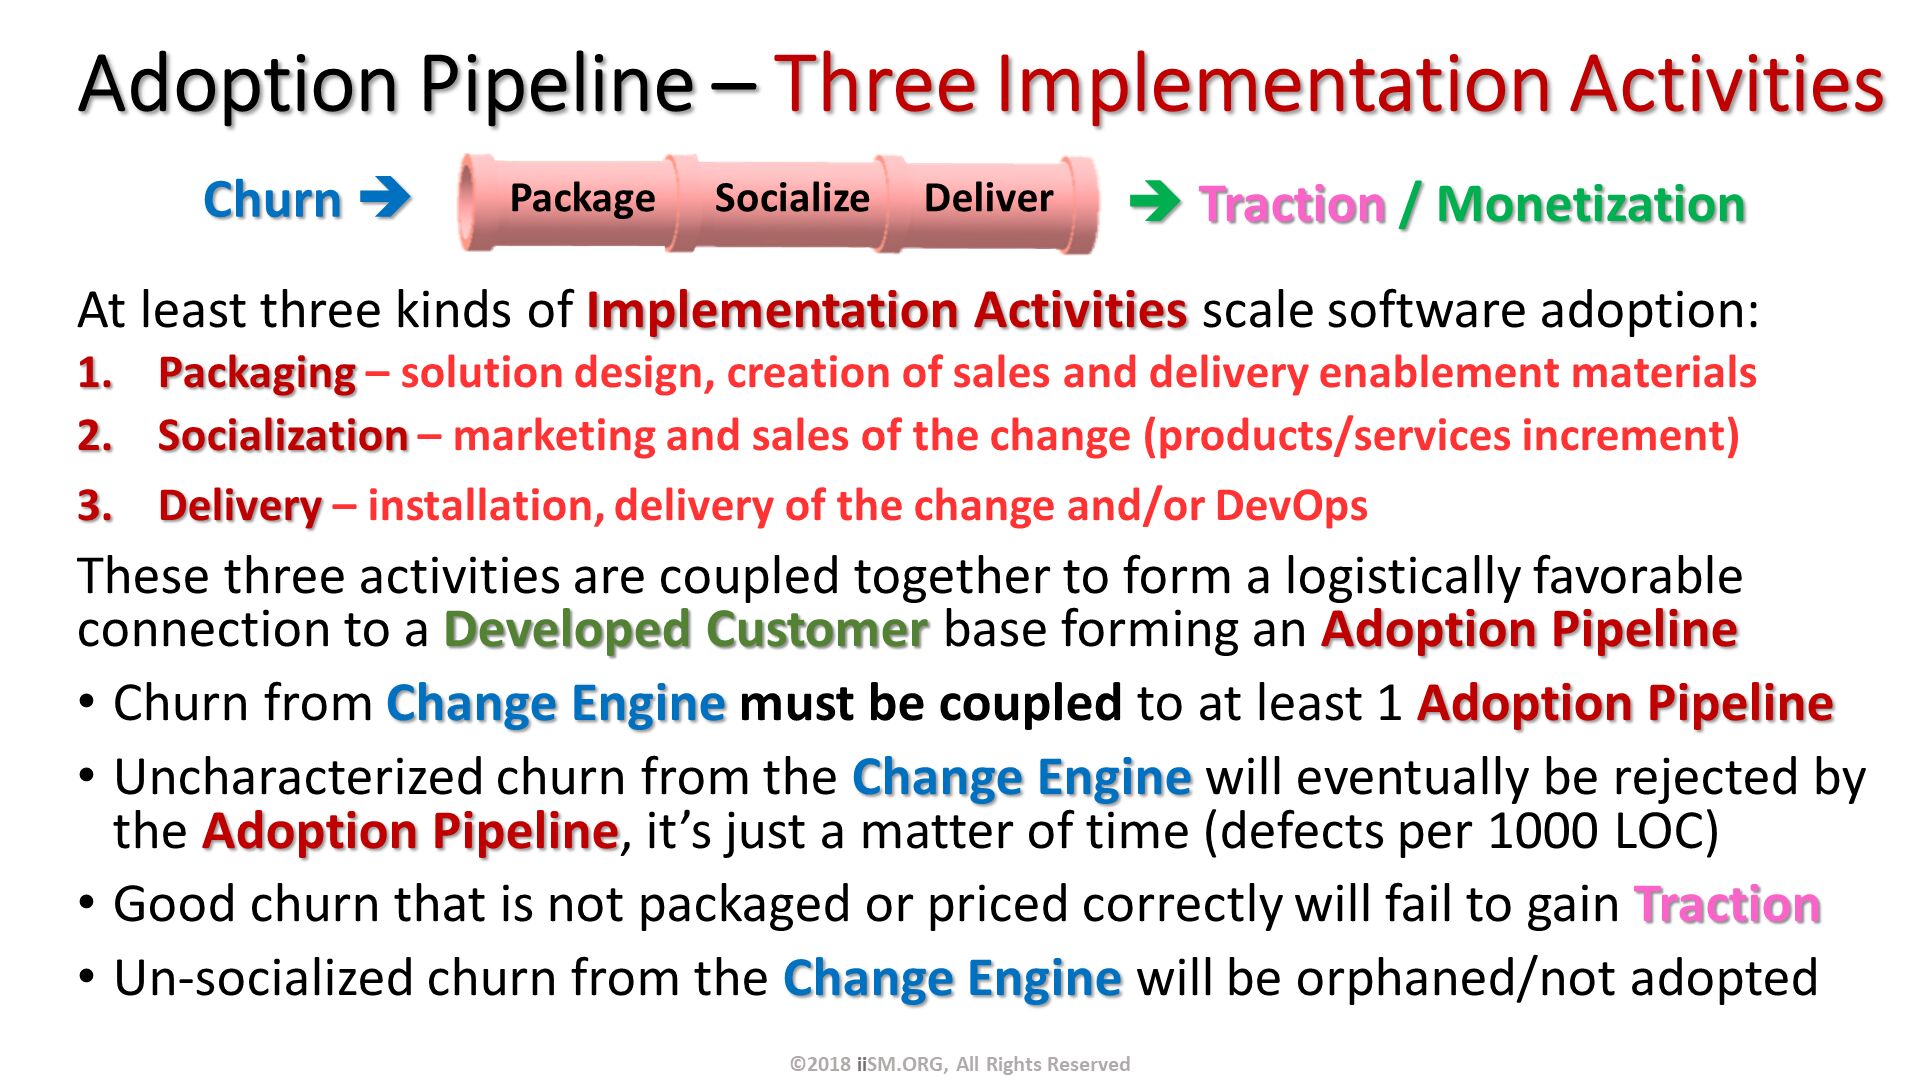 Adoption Pipeline – Three Implementation Activities. At least three kinds of Implementation Activities scale software adoption:
Packaging – solution design, creation of sales and delivery enablement materials
Socialization – marketing and sales of the change (products/services increment)
Delivery – installation, delivery of the change and/or DevOps
These three activities are coupled together to form a logistically favorable connection to a Developed Customer base forming an Adoption Pipeline
Churn from Change Engine must be coupled to at least 1 Adoption Pipeline
Uncharacterized churn from the Change Engine will eventually be rejected by the Adoption Pipeline, it’s just a matter of time (defects per 1000 LOC)
Good churn that is not packaged or priced correctly will fail to gain Traction
Un-socialized churn from the Change Engine will be orphaned/not adopted 
.  Traction / Monetization. Churn . ©2018 iiSM.ORG, All Rights Reserved. 